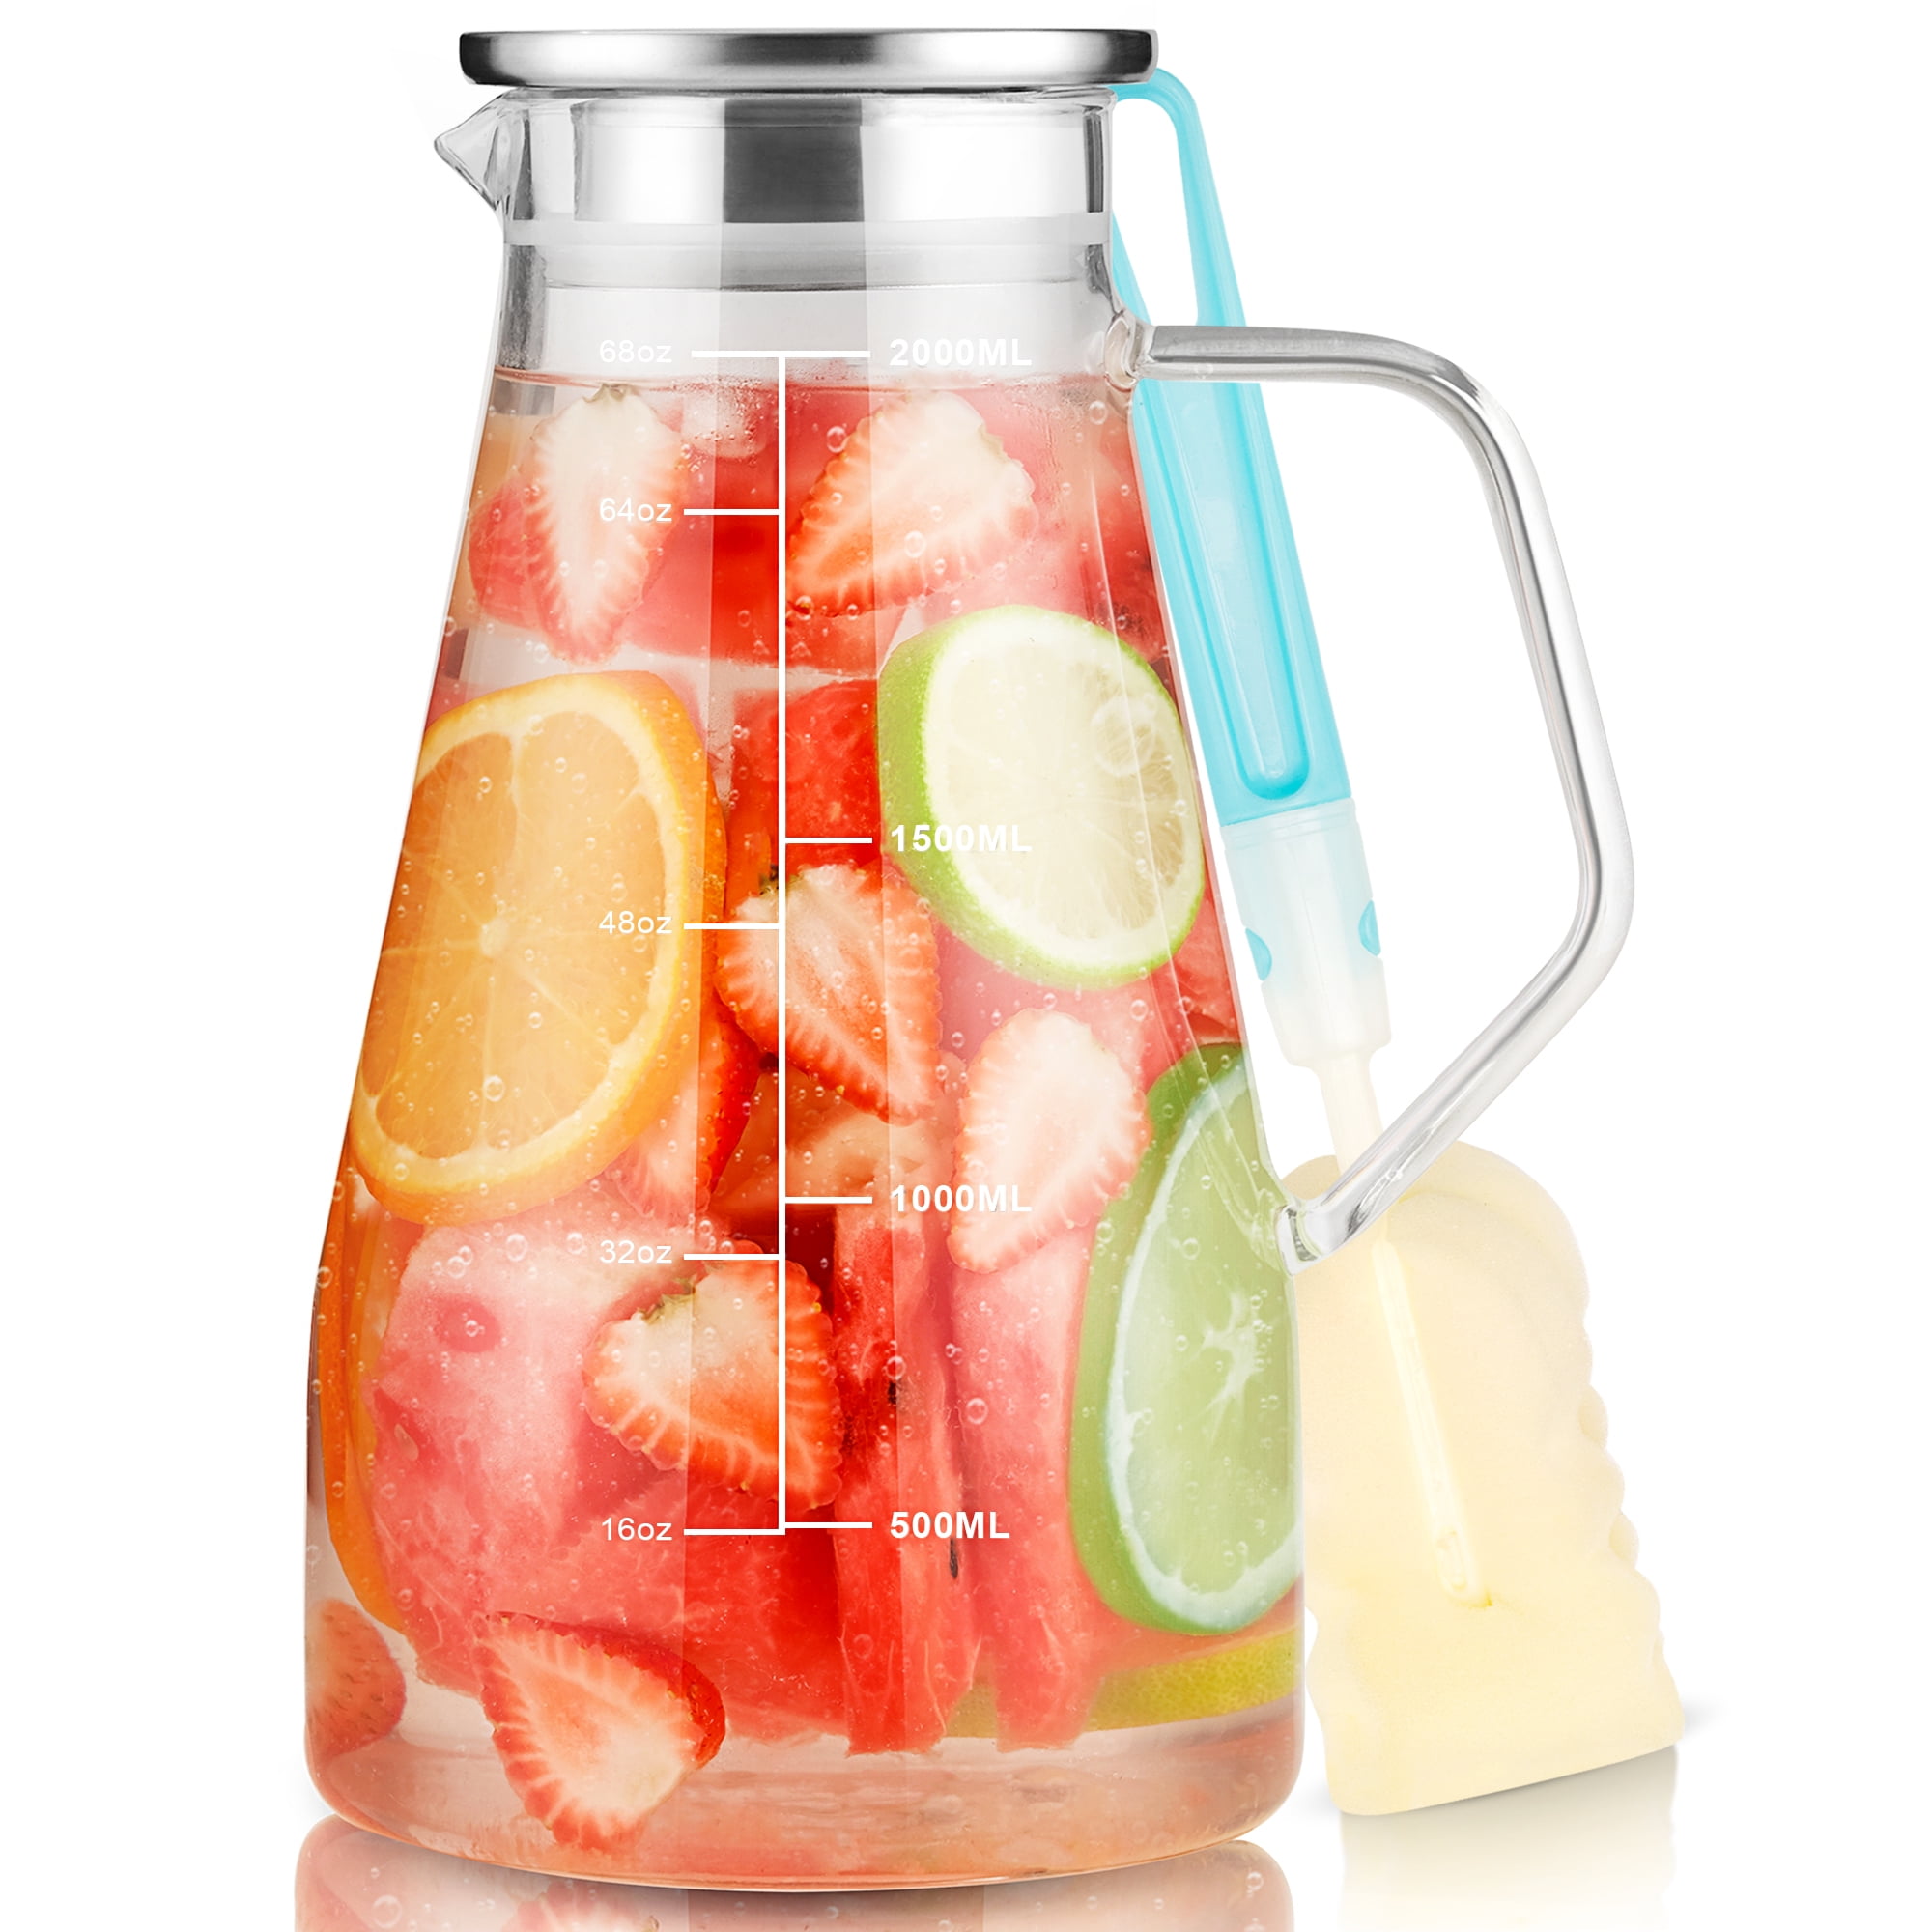 SUSTEAS 2 Liter Glass Pitcher, Water Pitcher with Removable Lid